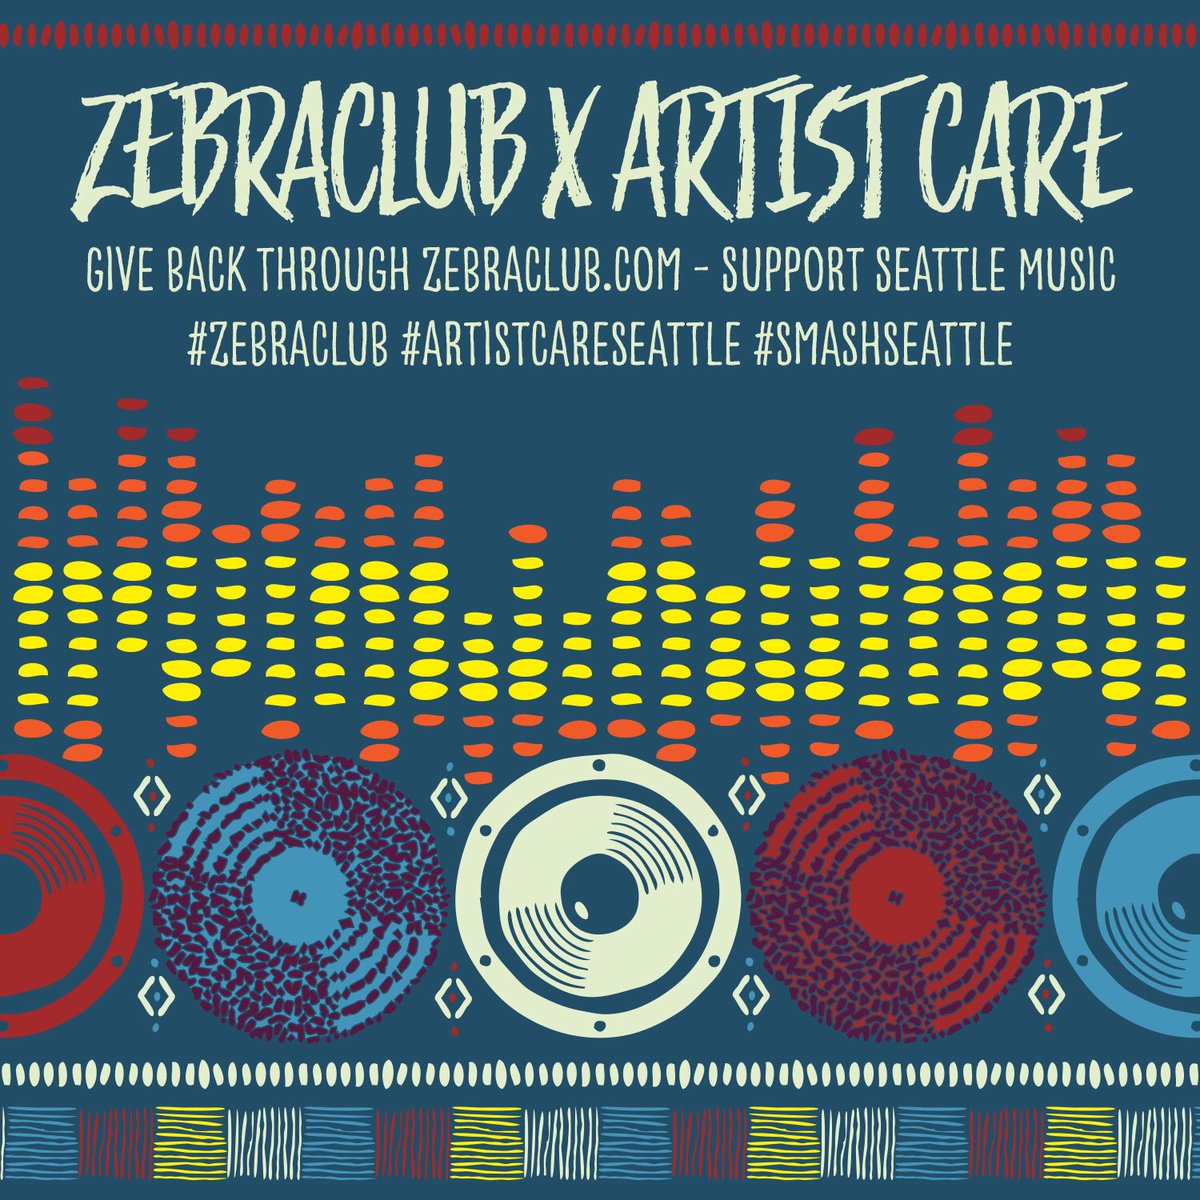 This month, Zebraclub is offering 30% discount on all full price purchases with the code, 'ARTISTS'! In addition, they are giving back 30% of net proceeds (after returns, discounts, and shipping) to participating non-profit, SMASH. http://zebraclub.com 